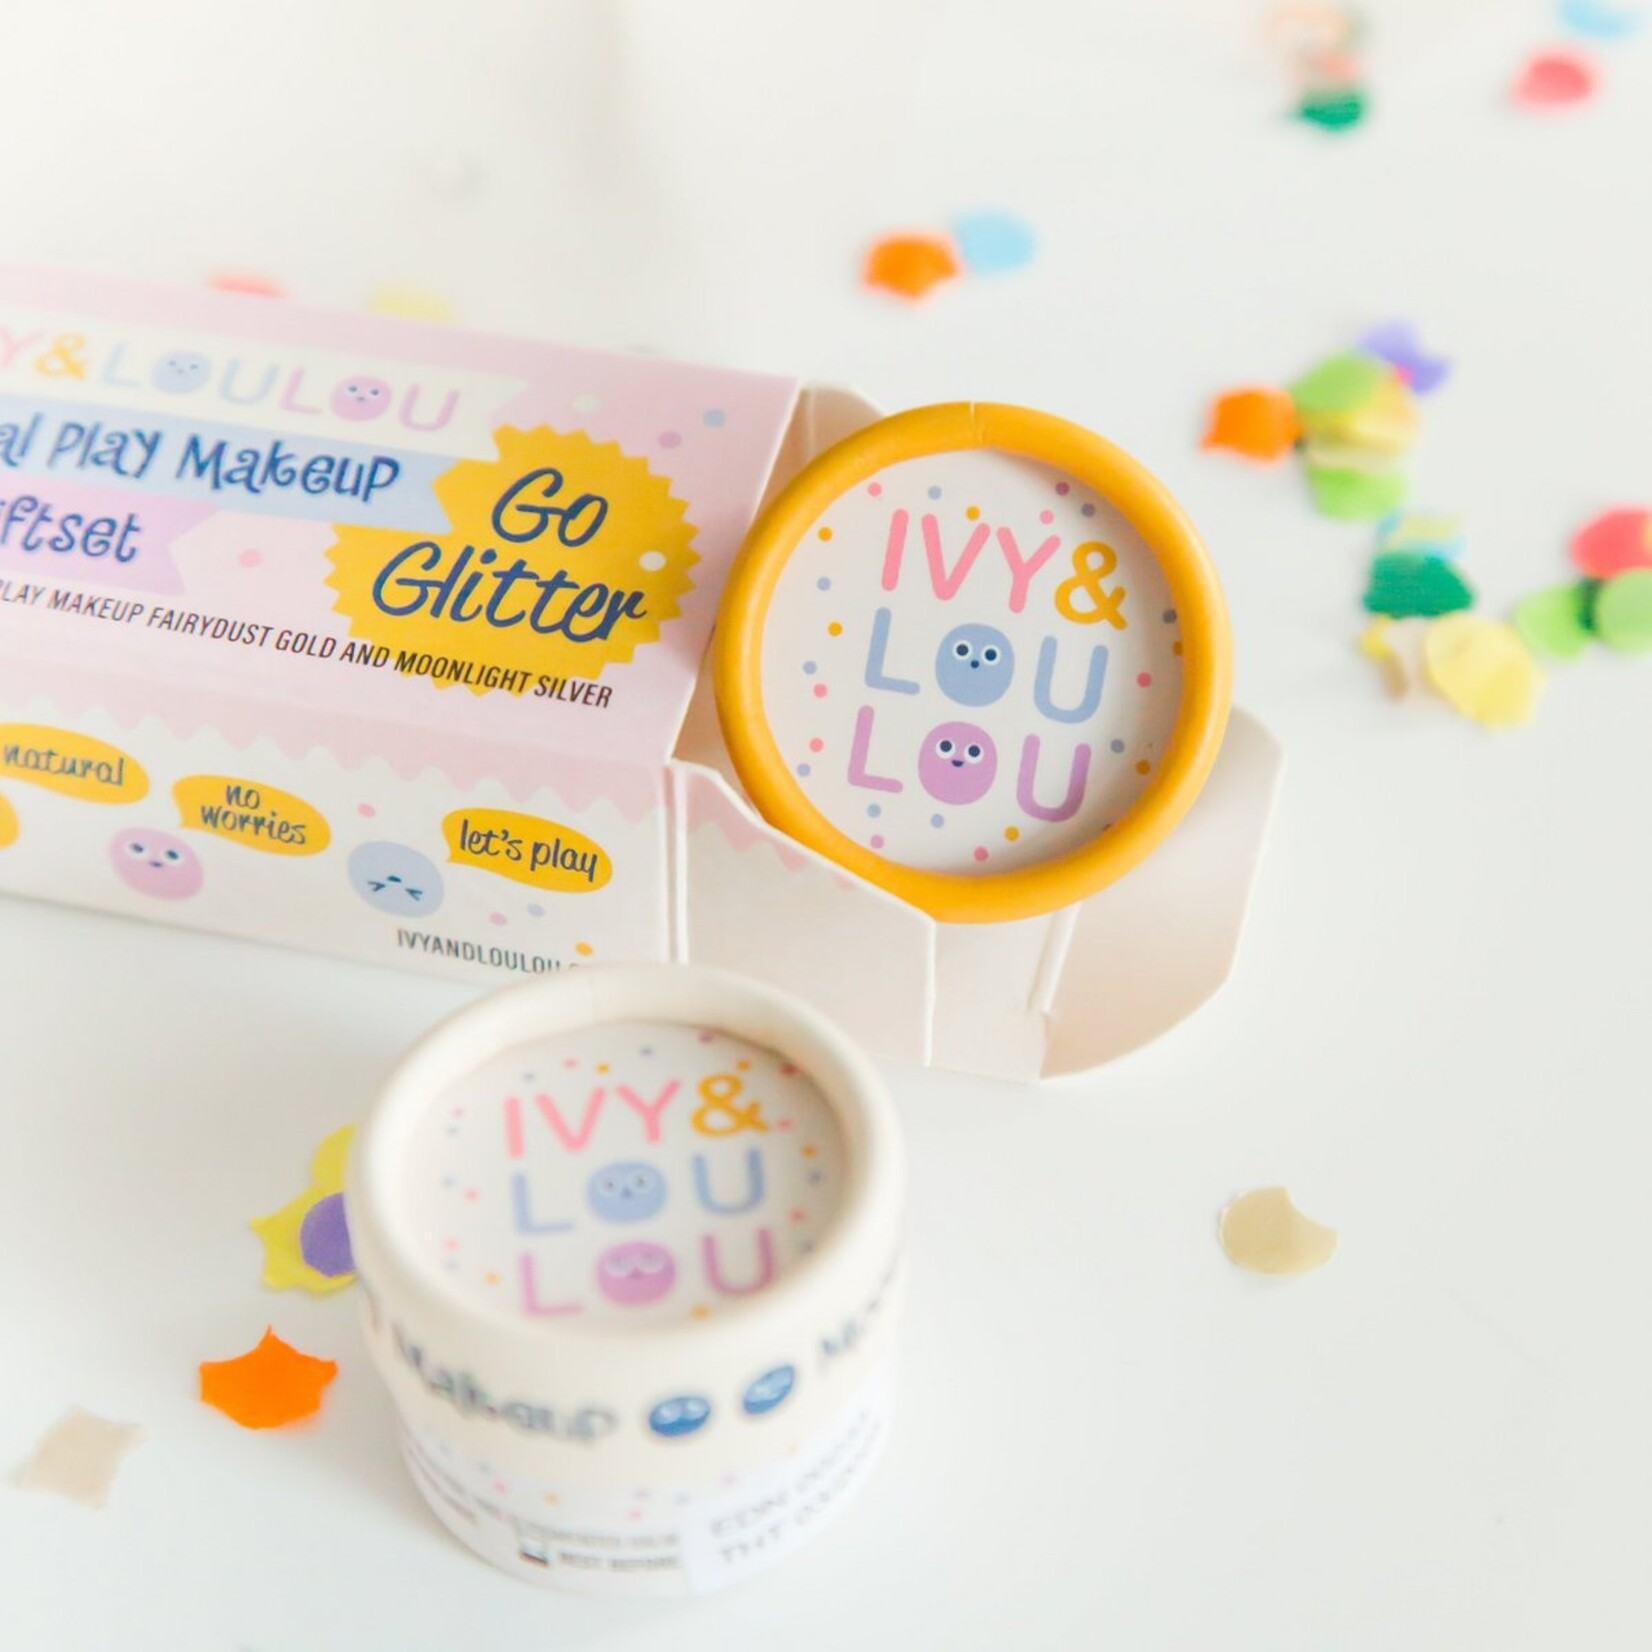 Ivy & Loulou Go Glitter Giftset